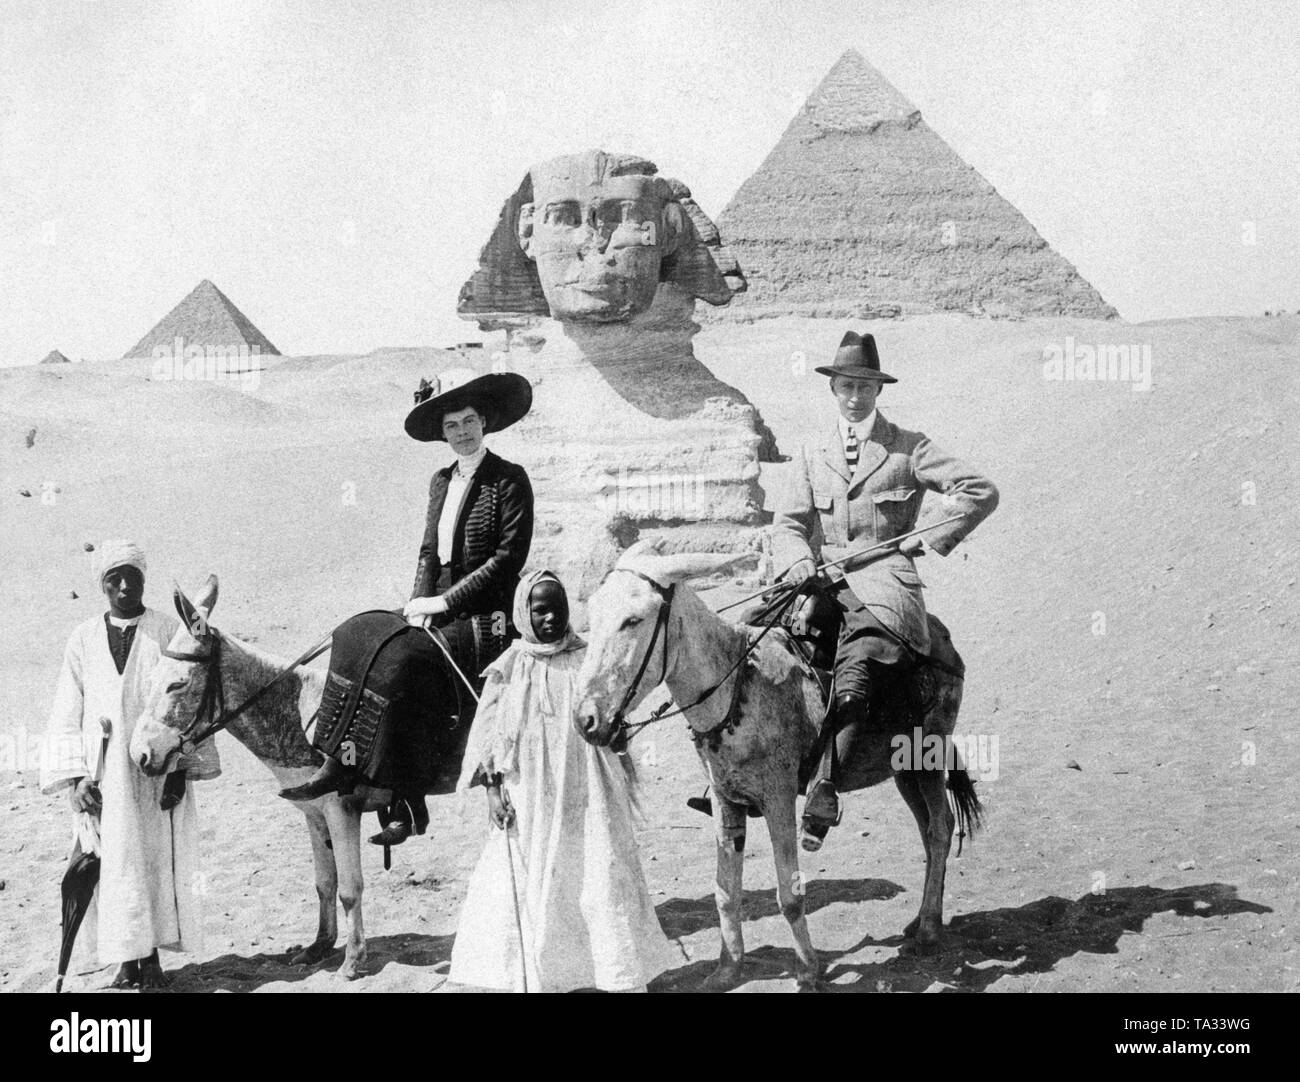 The German Crown Prince William, the eldest son of Emperor William II, and his wife Cecilia pose on donkeys in front of the Sphinx in Giza, in the background the pyramids. A trip to Egypt was considered an expensive and extravagant adventure at that time. Stock Photo